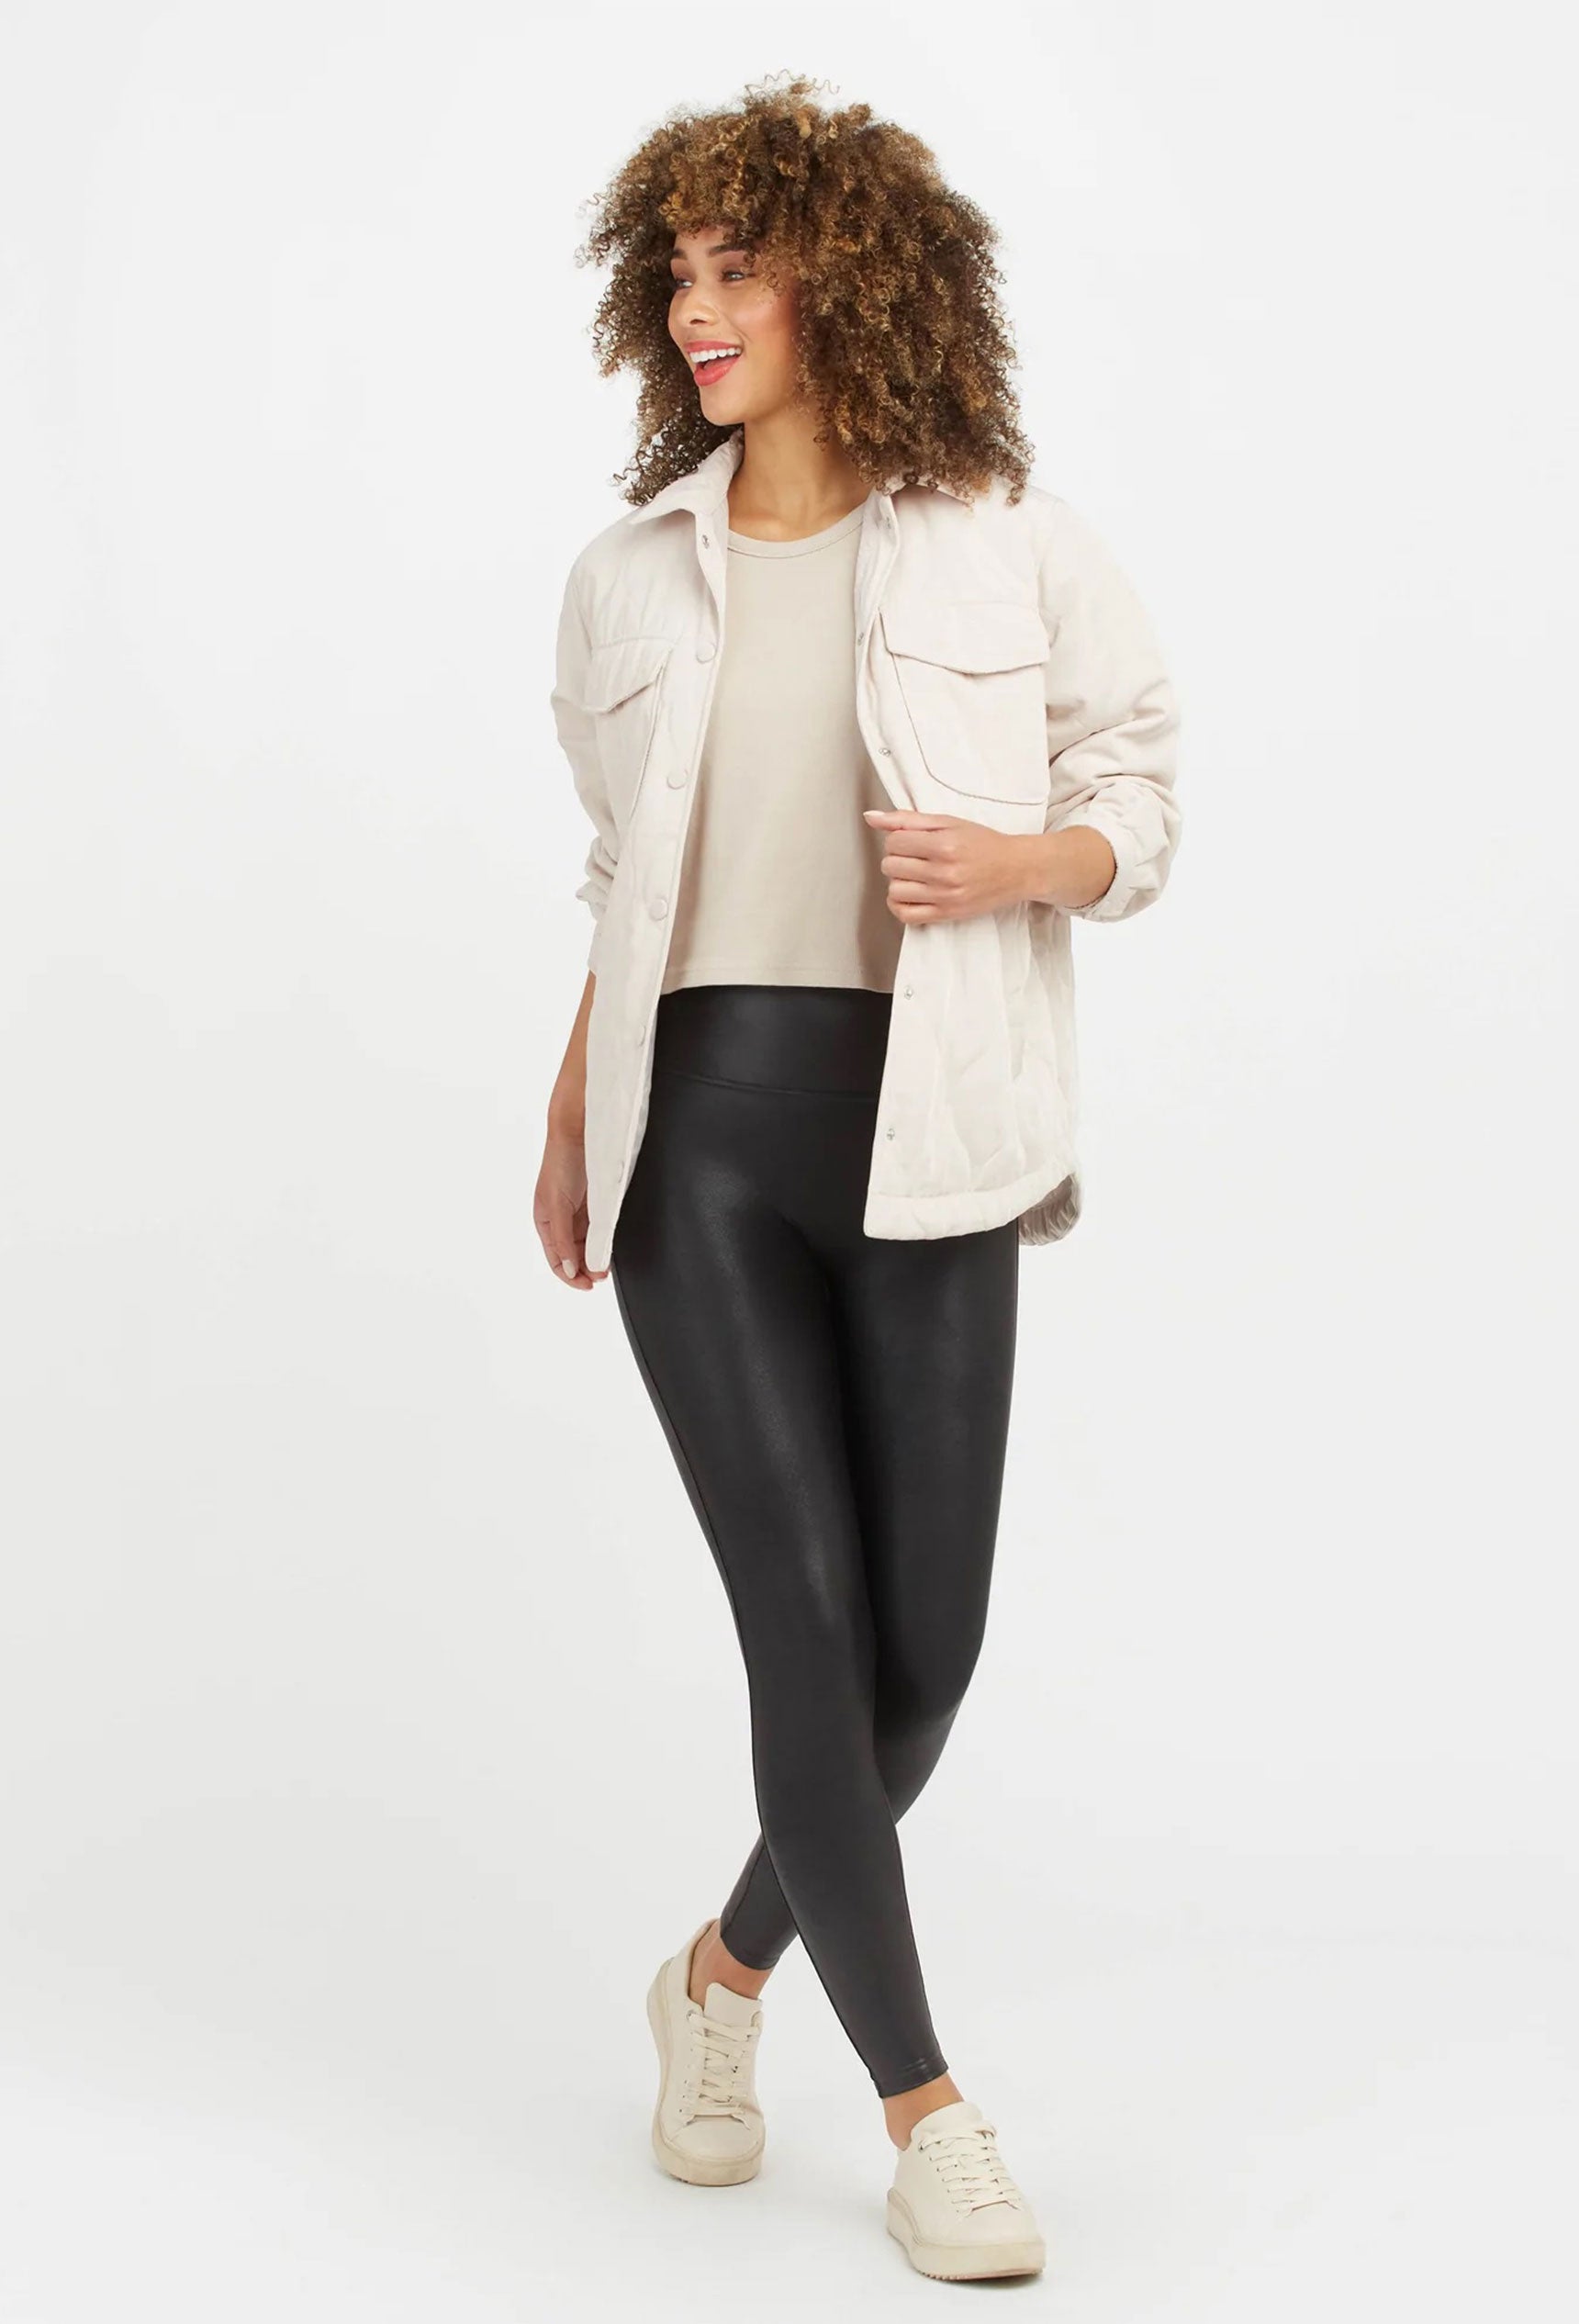 Spanx Faux Leather Leggings in Petite